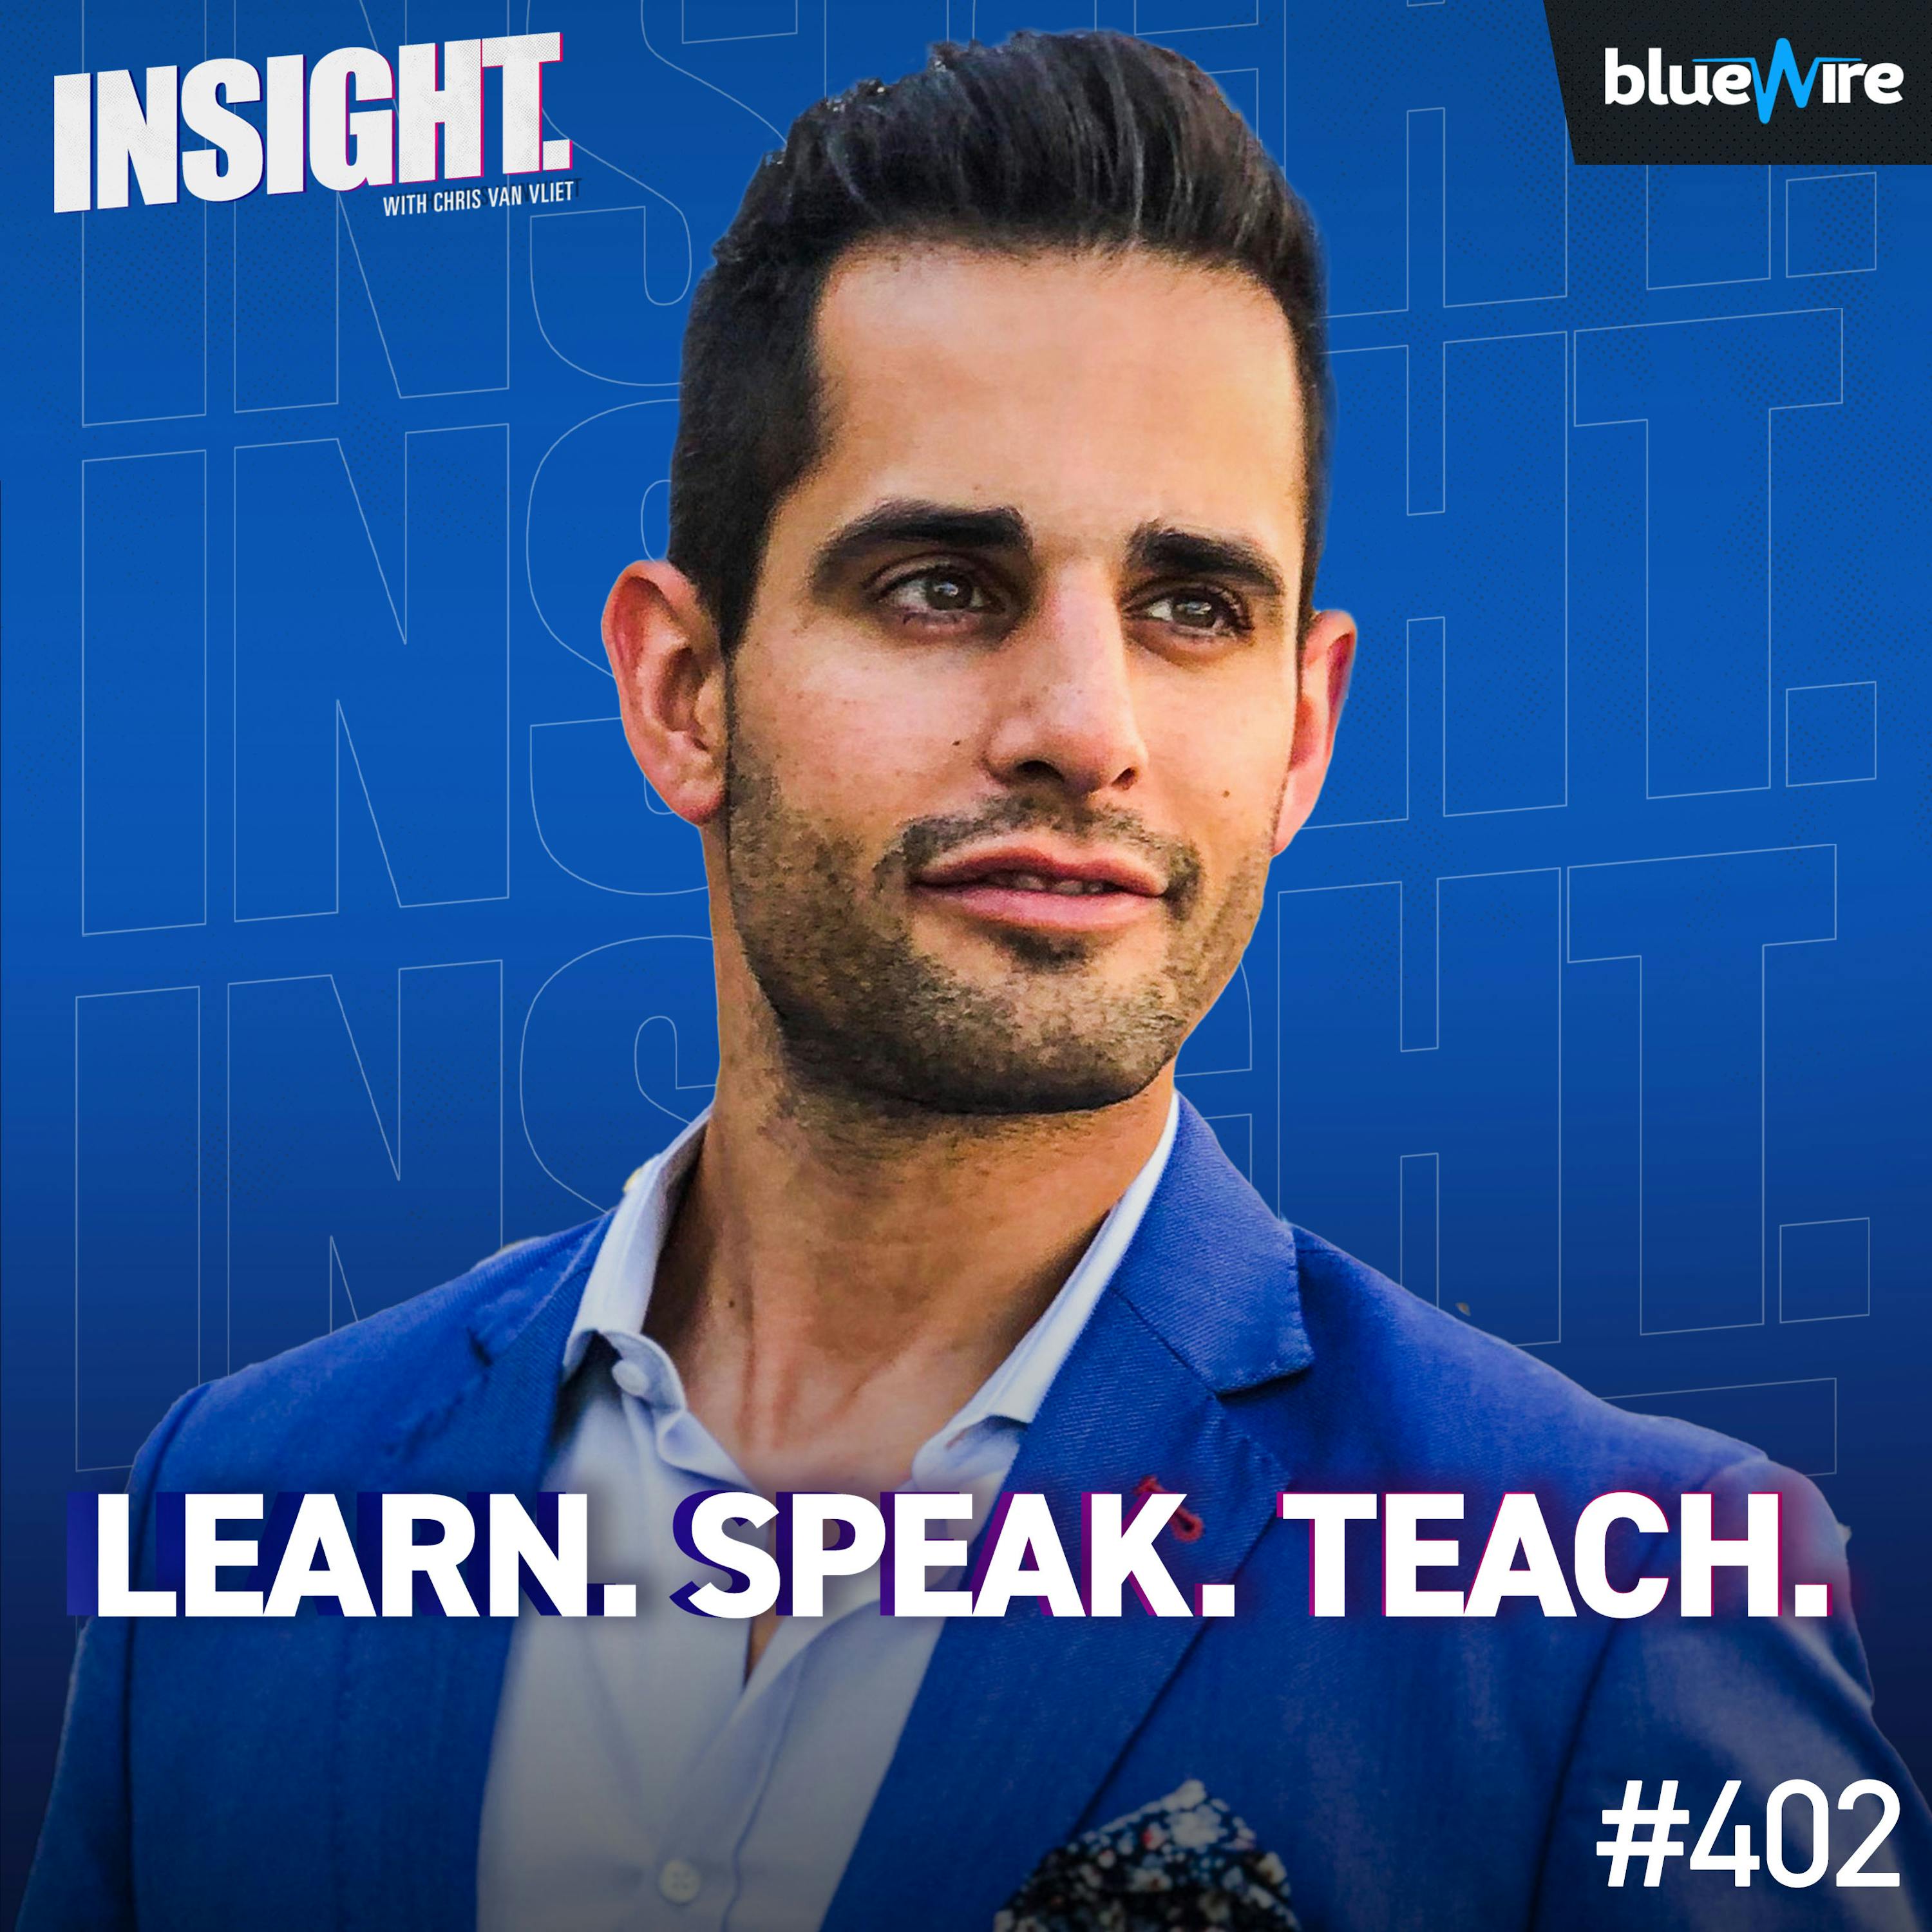 Chris Van Vliet On Being Laid Off, Starting Fresh & The Power Of Asking The Right Questions - My Interview on "Learn Speak Teach"